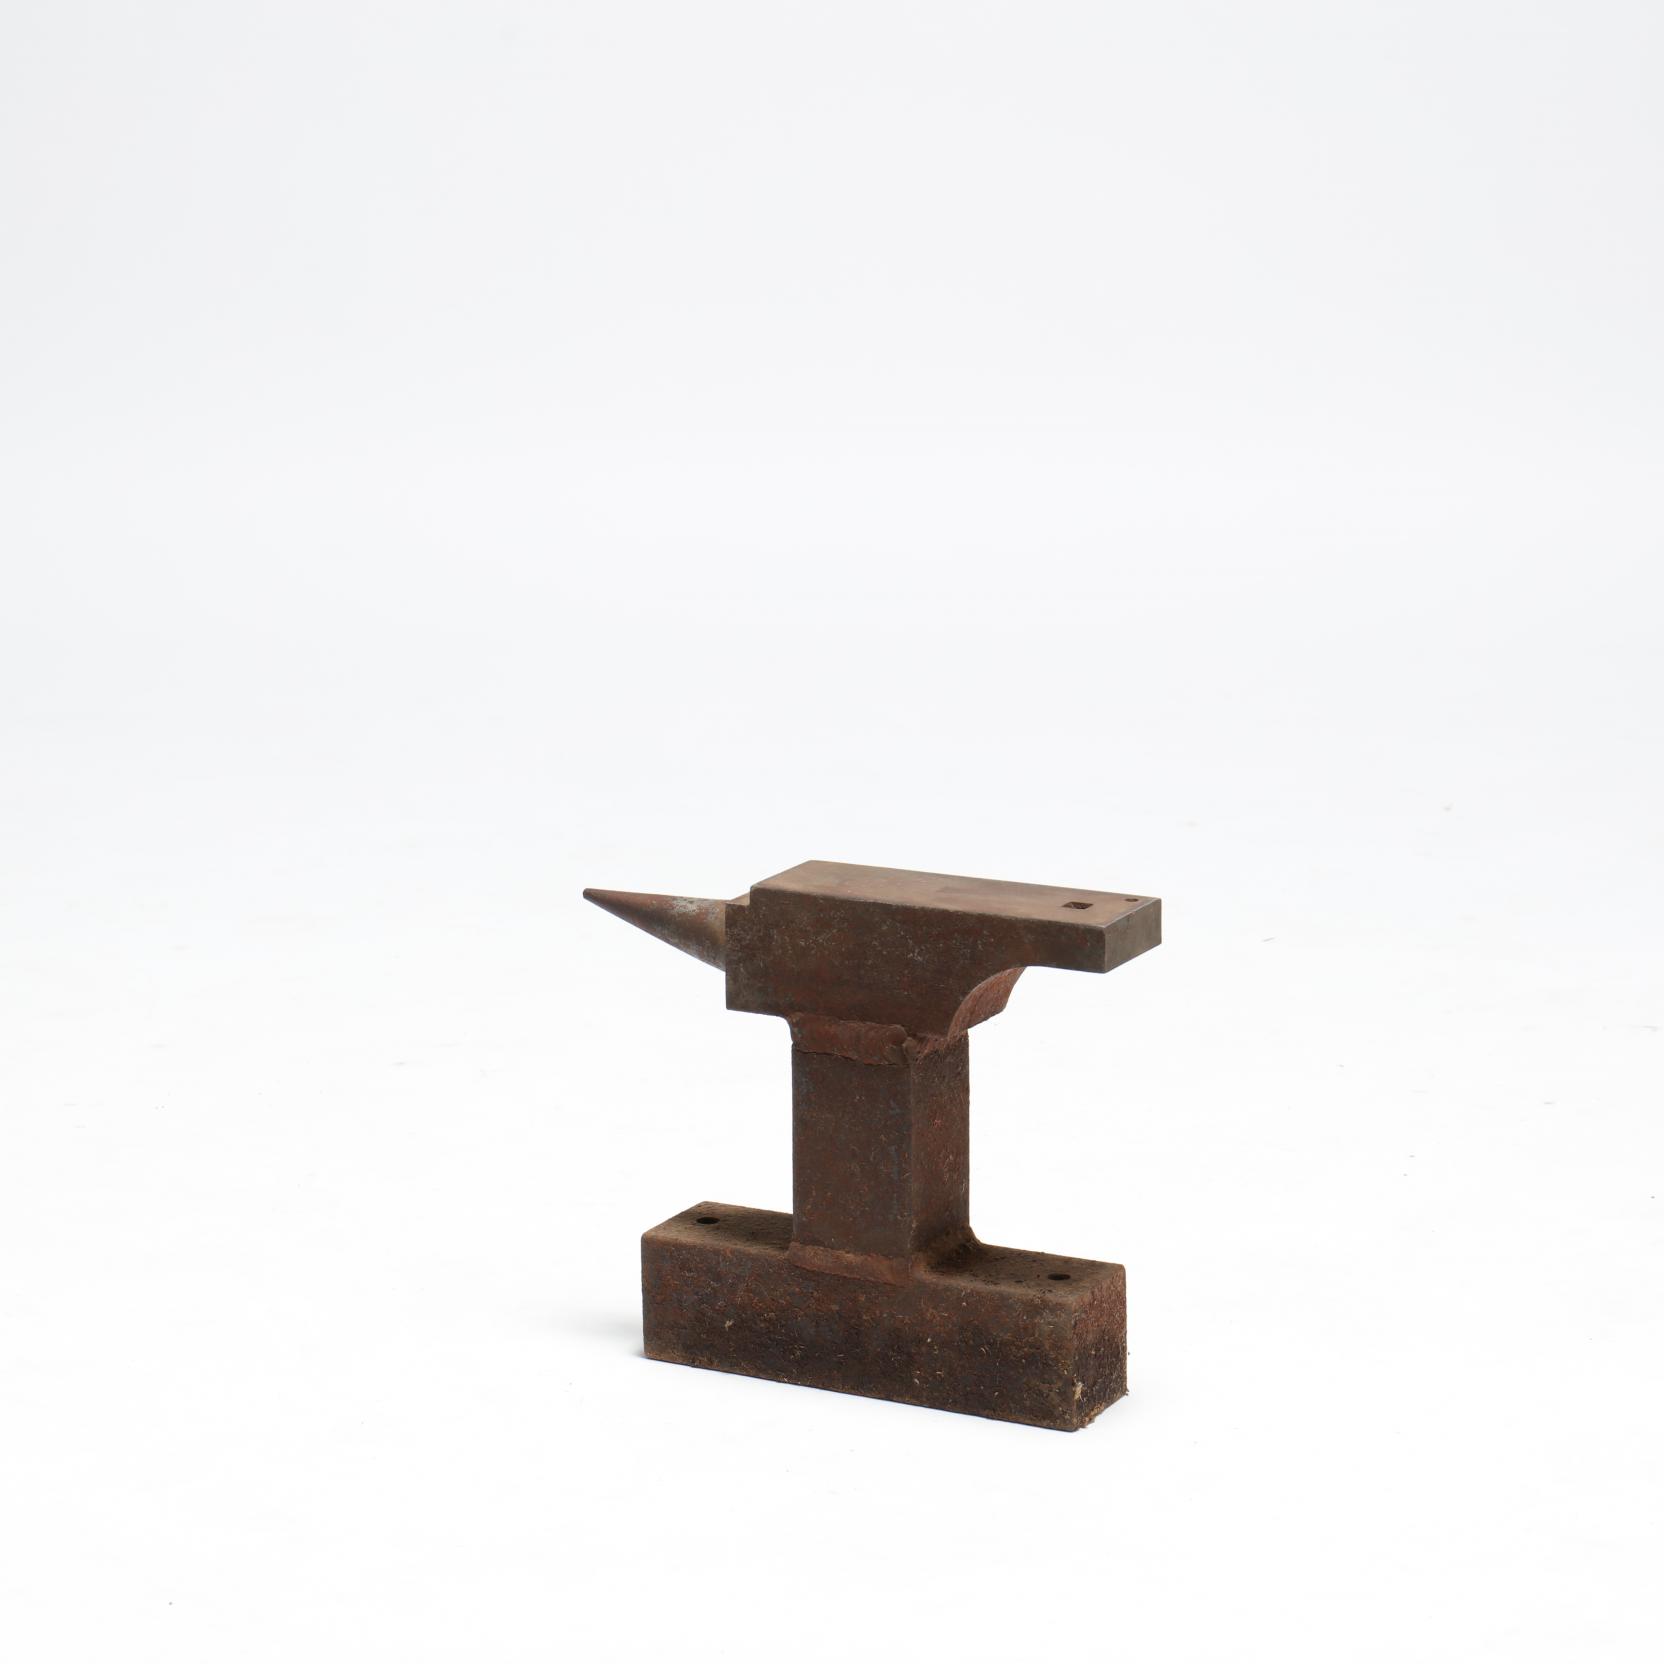 Vintage Small Anvil (Lot 401 - March Gallery AuctionMar 24, 2018, 9:00am)